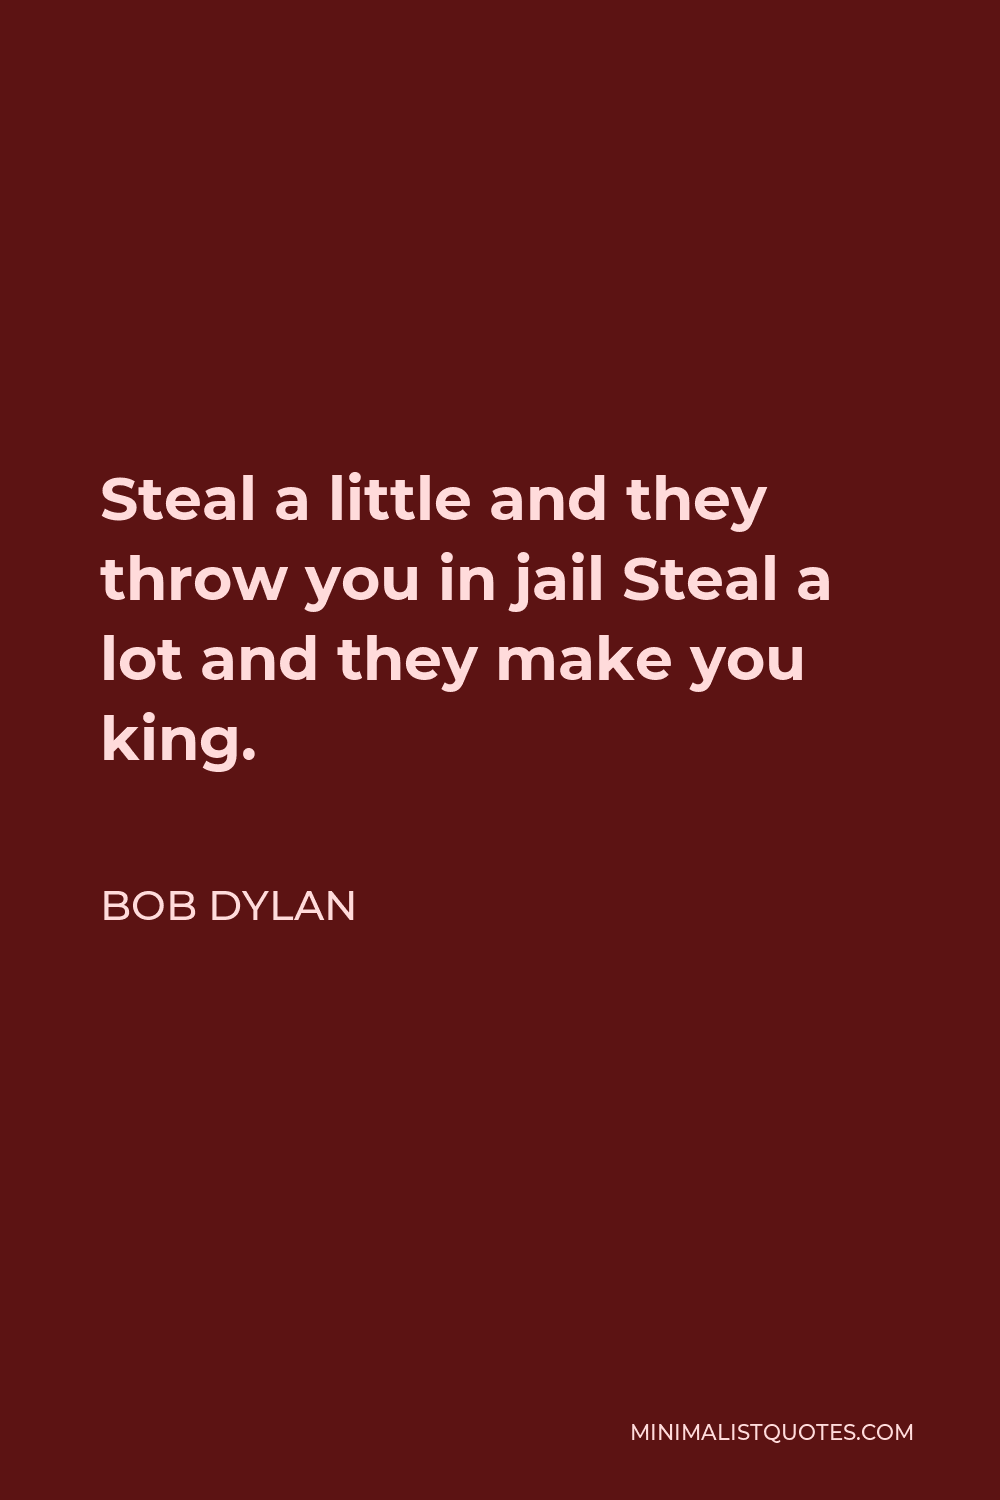 Bob Dylan Quote - Steal a little and they throw you in jail Steal a lot and they make you king.